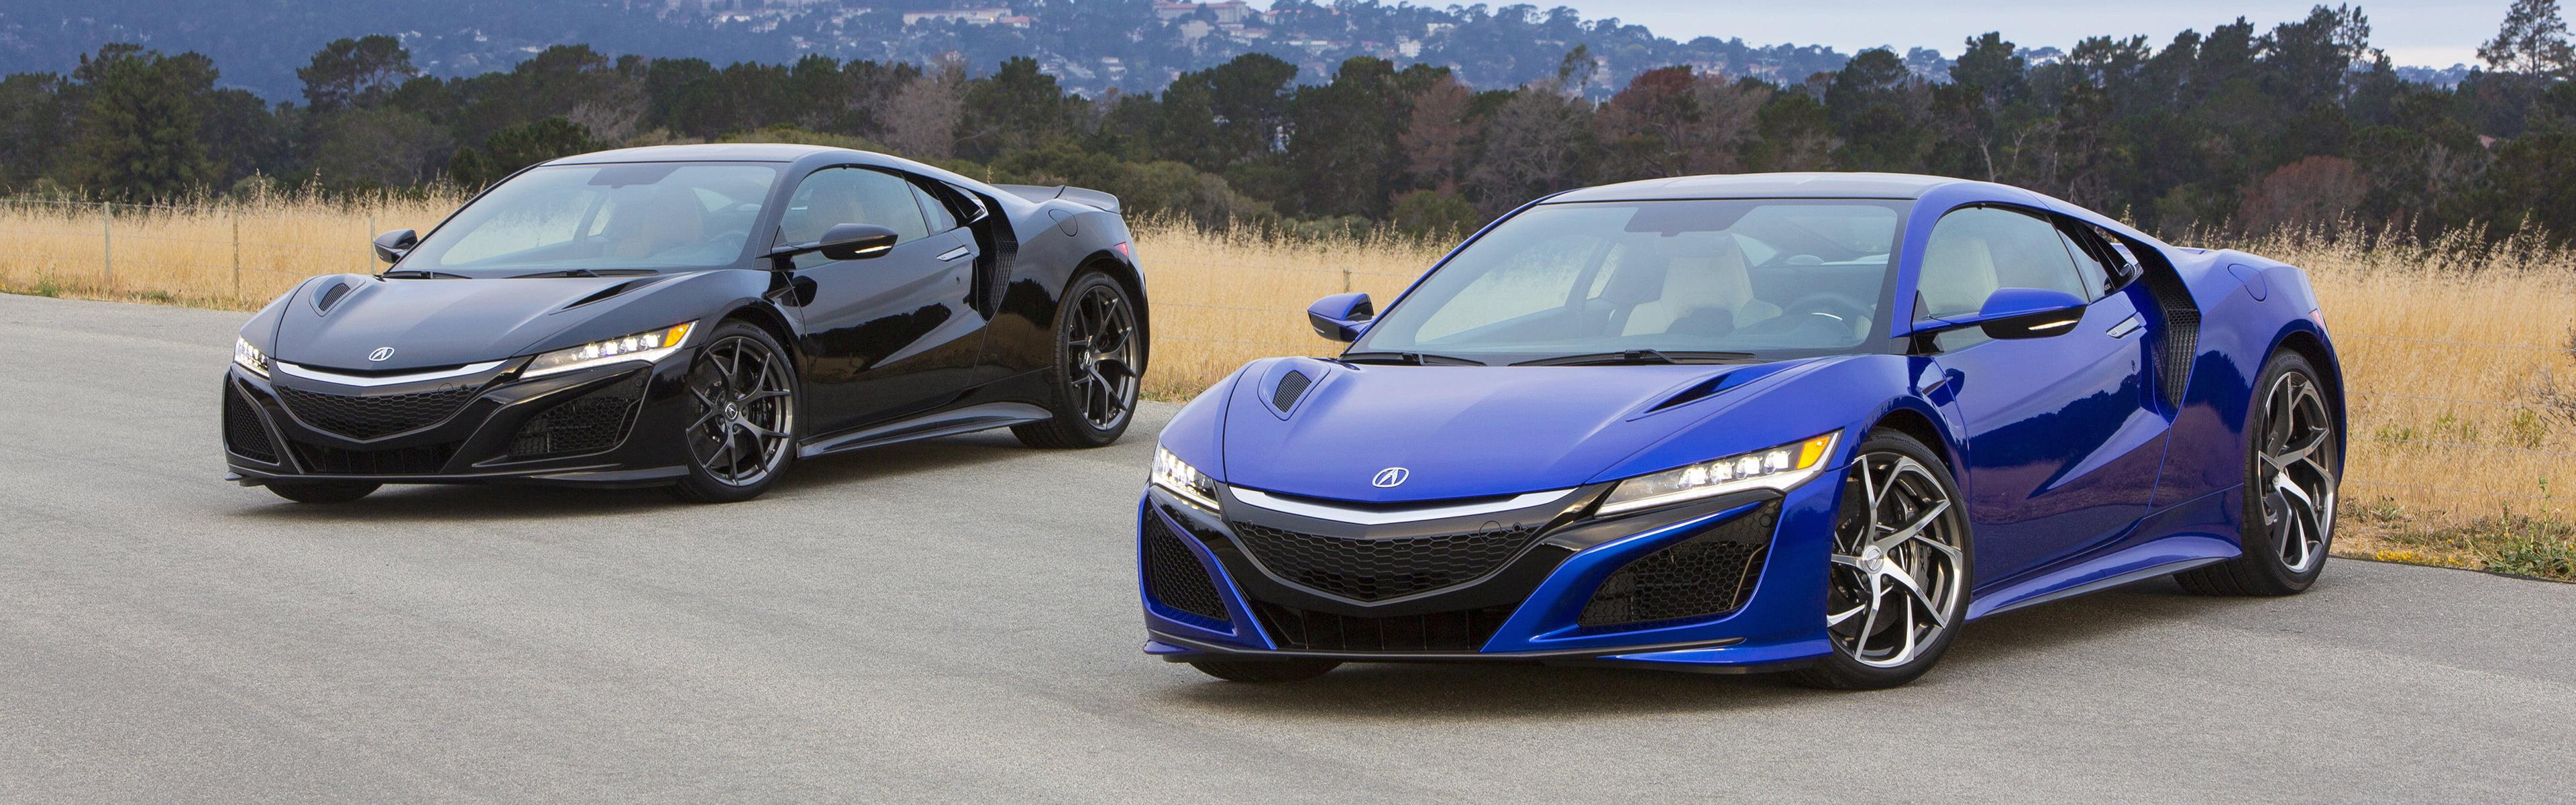 Two black and blue coupes, Acura NSX, car, vehicle, dual